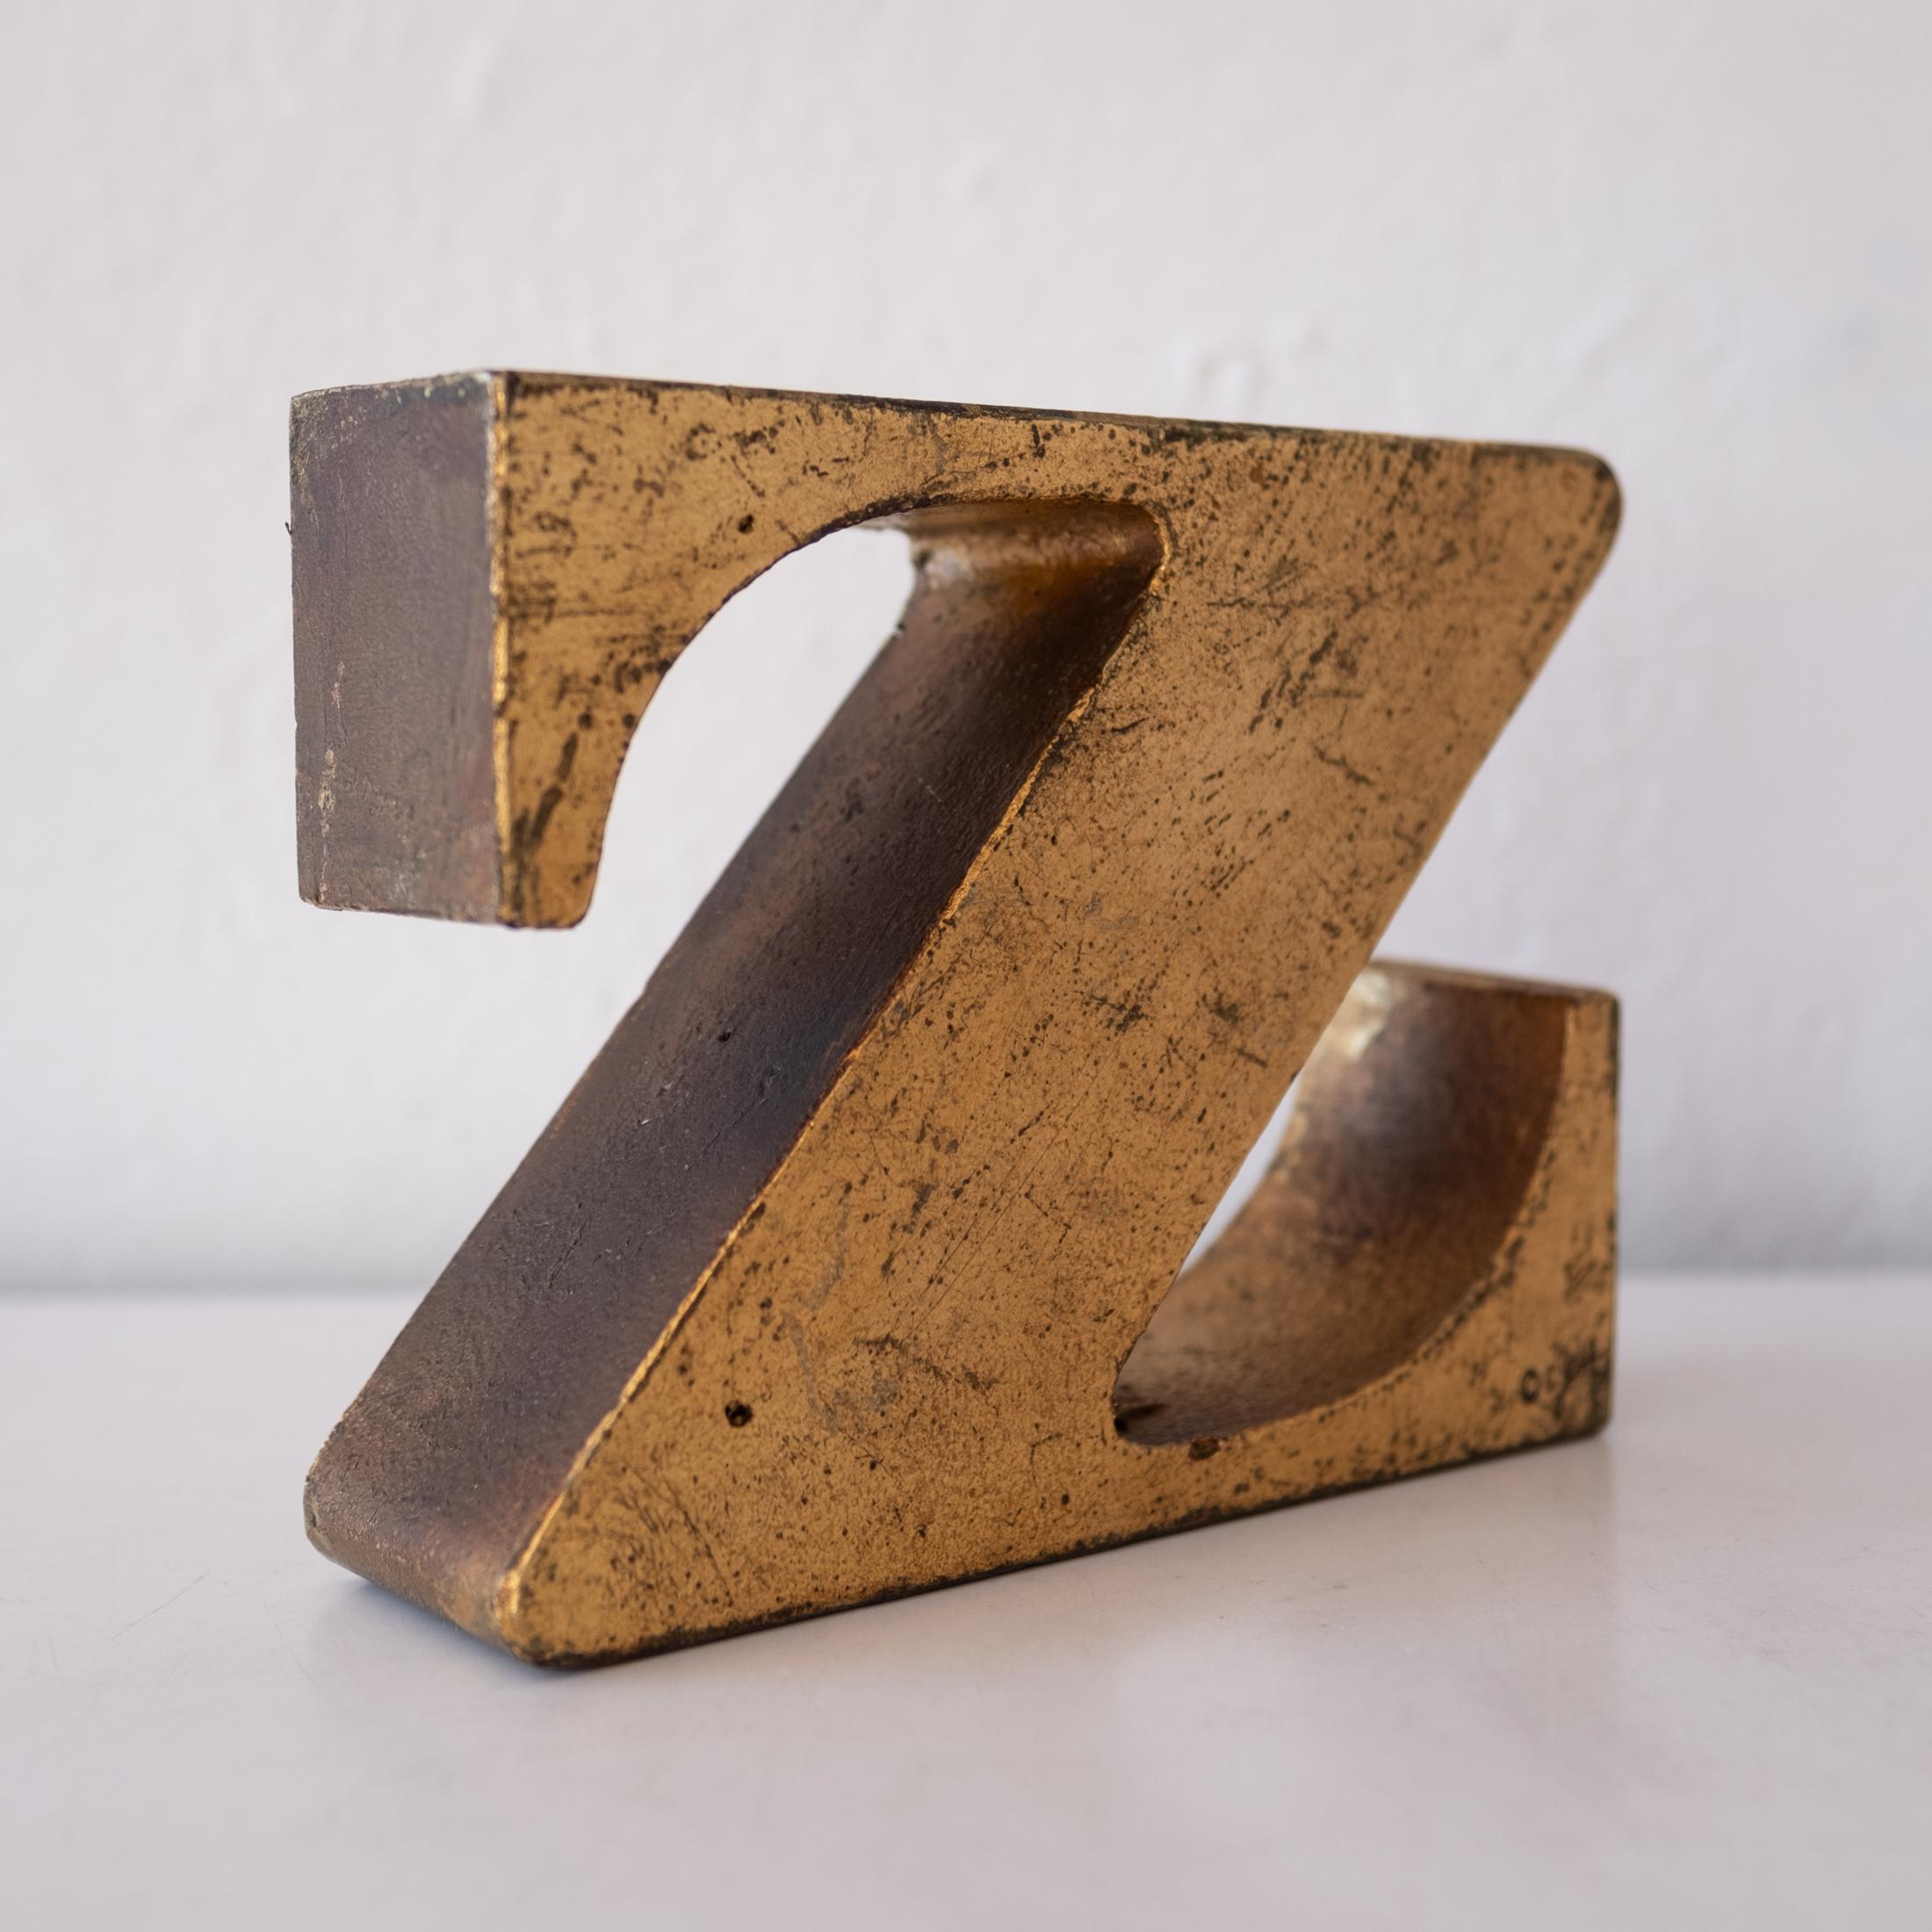 Mid-Century Modern Z Bookend by Curtis Jere Signed & Dated 1971 in Gold Leaf Finish For Sale